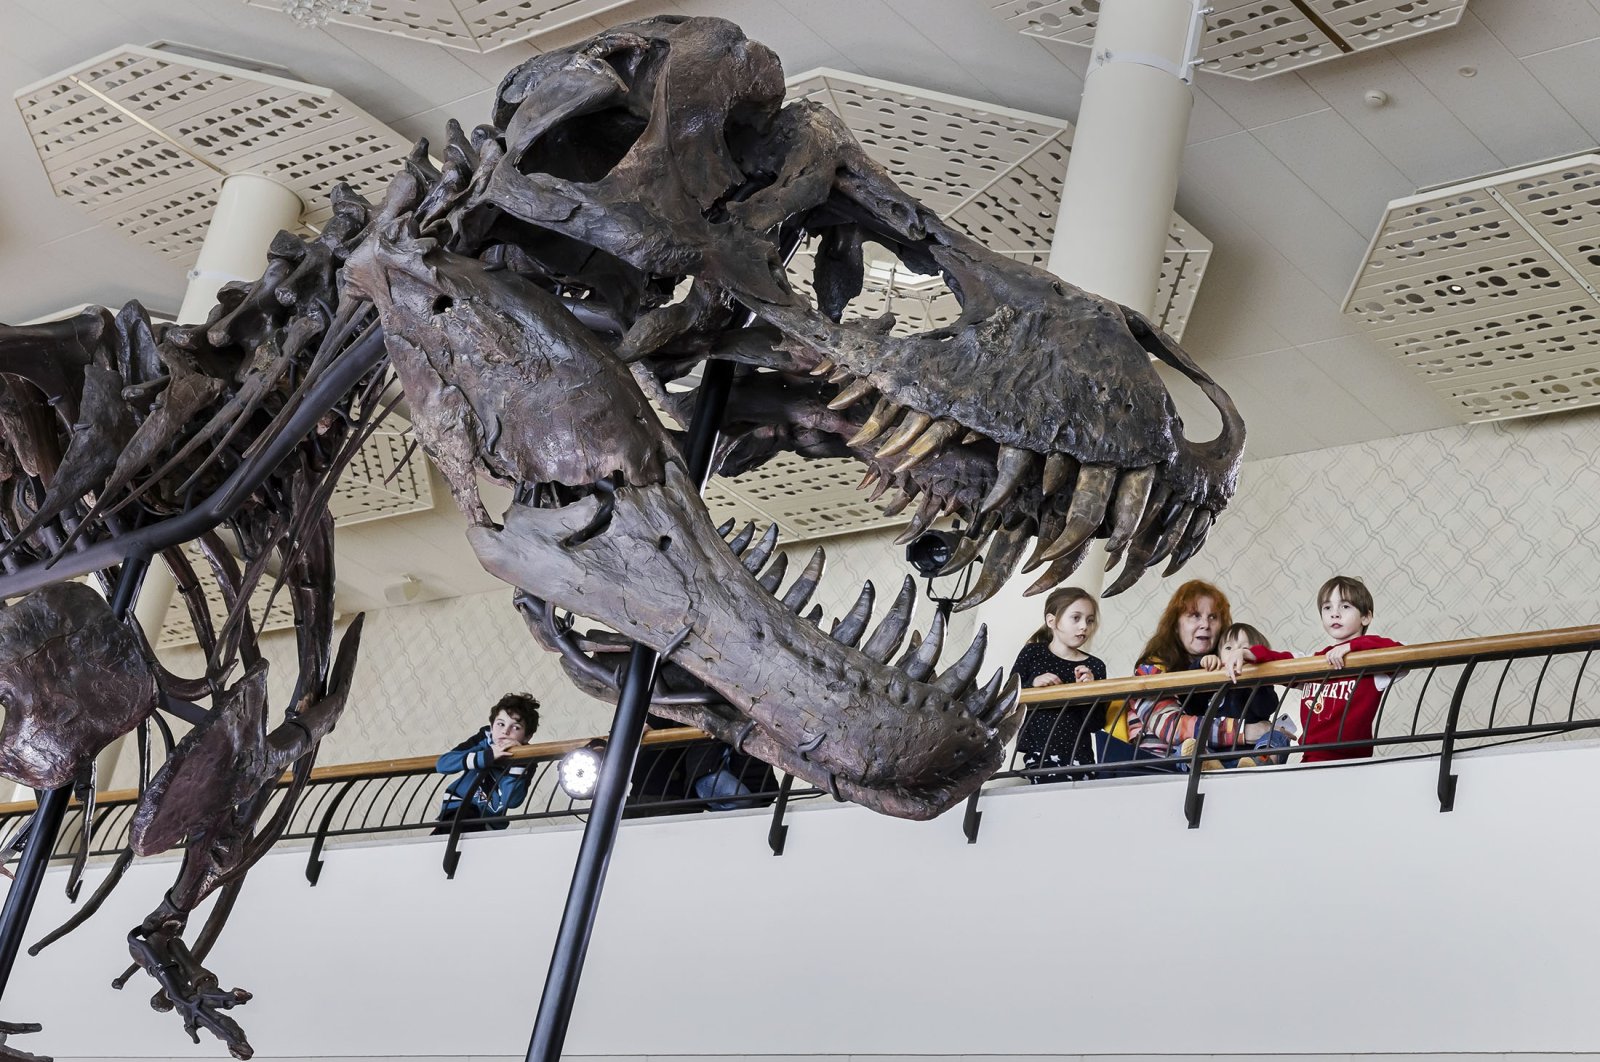 Visitors watch the skeleton of a Tyrannosaurus rex named Trinity, during a preview by auction house Koller at the Tonhalle Zurich concert hall, in Zurich, Switzerland, March 29, 2023. (AP Photo)